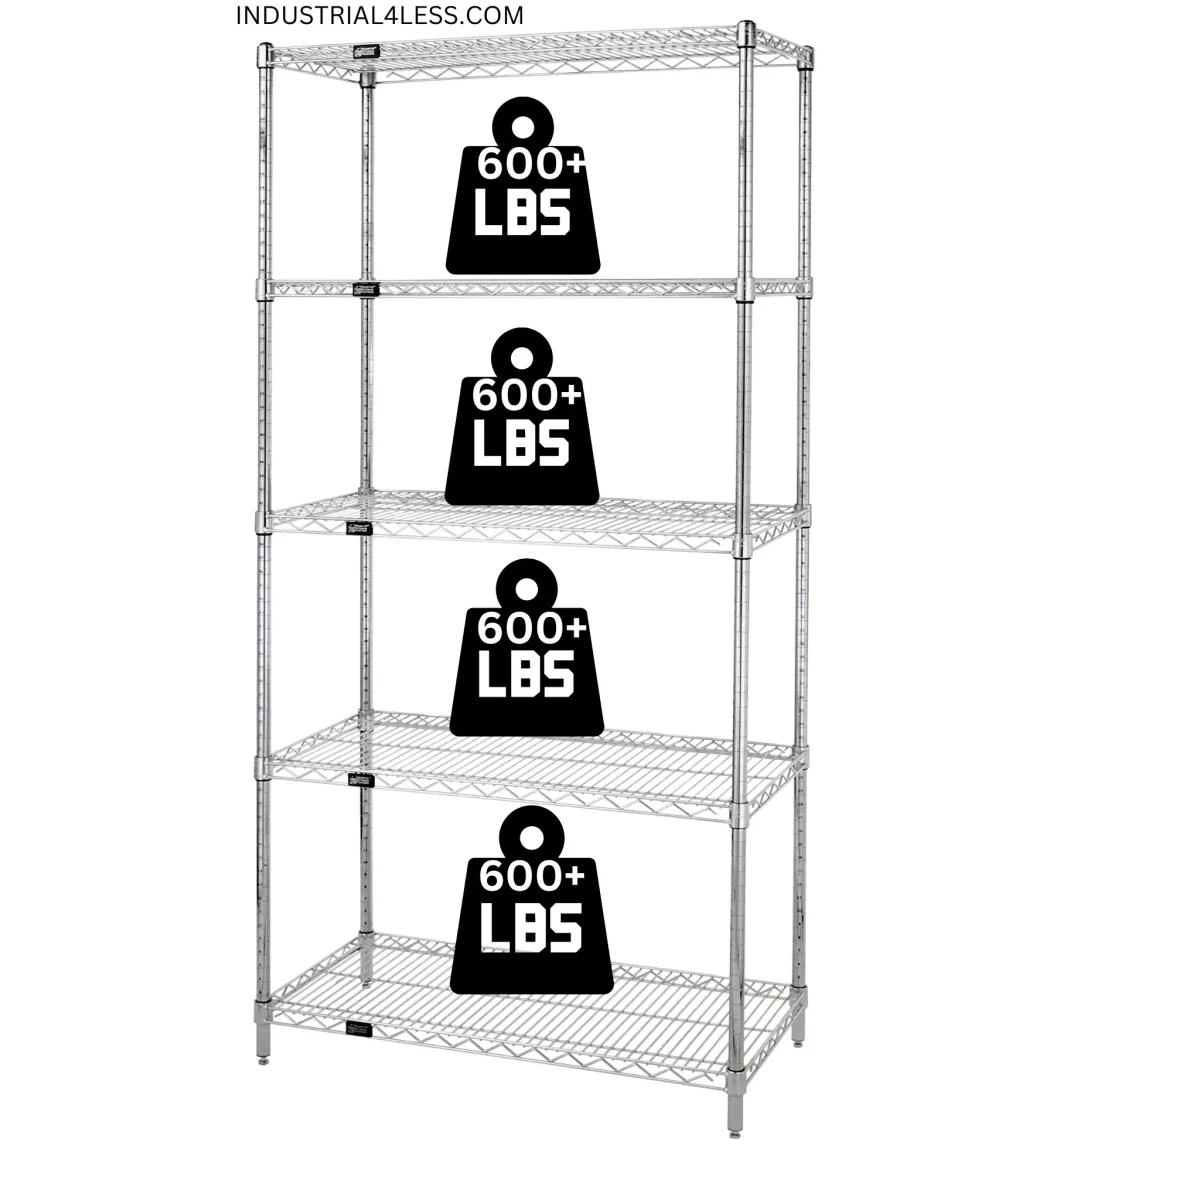 12" x 60" Stainless Steel Wire Shelving Unit - Industrial 4 Less - 12605S-5